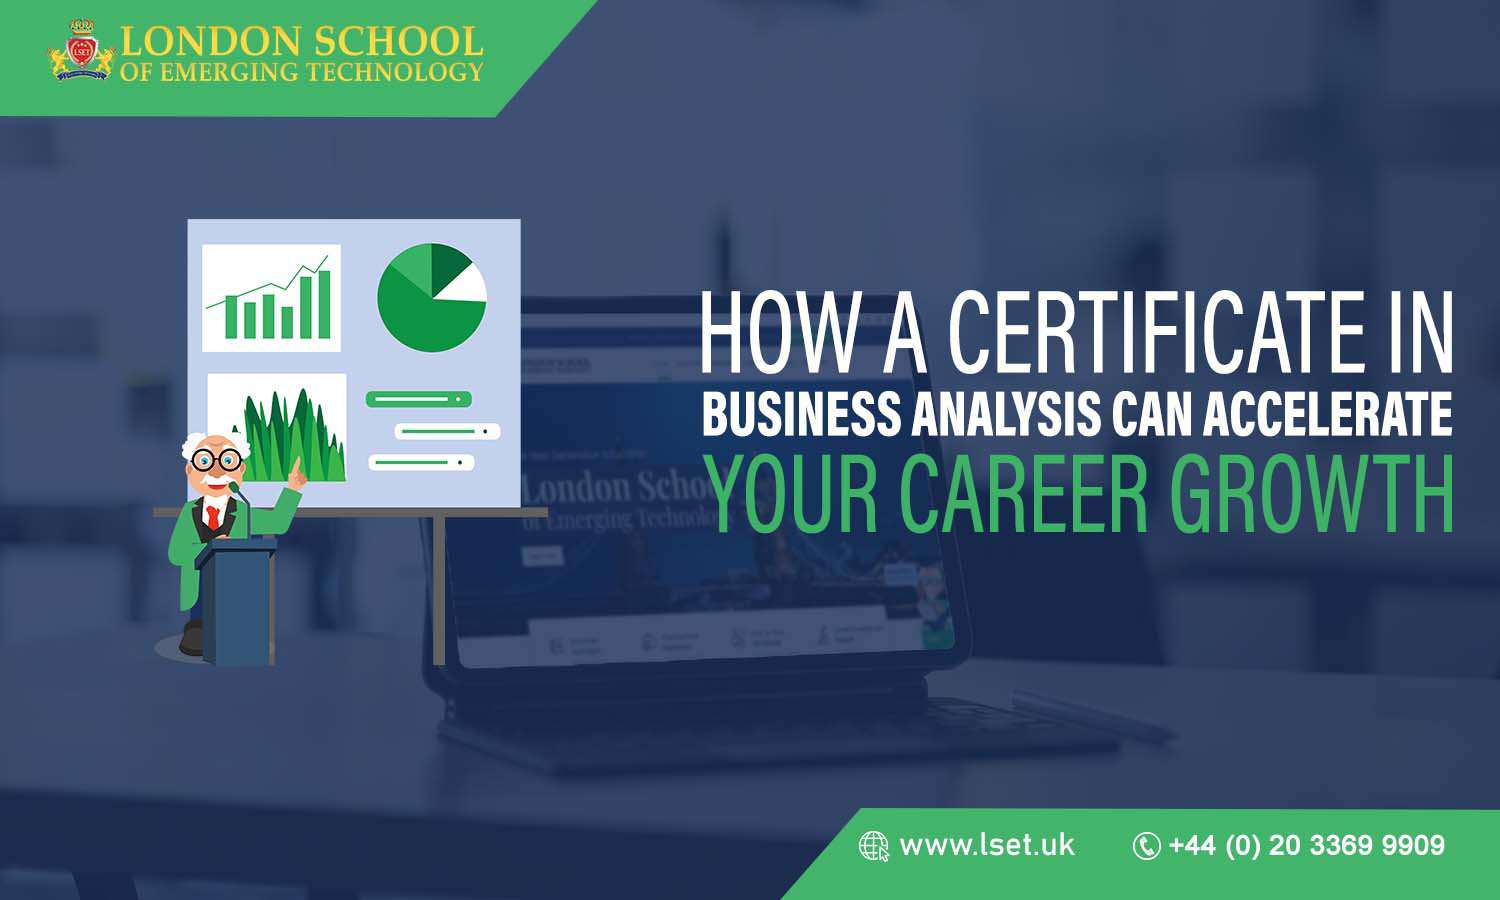 How a Certificate in Business Analysis Can Accelerate Your Career Growth